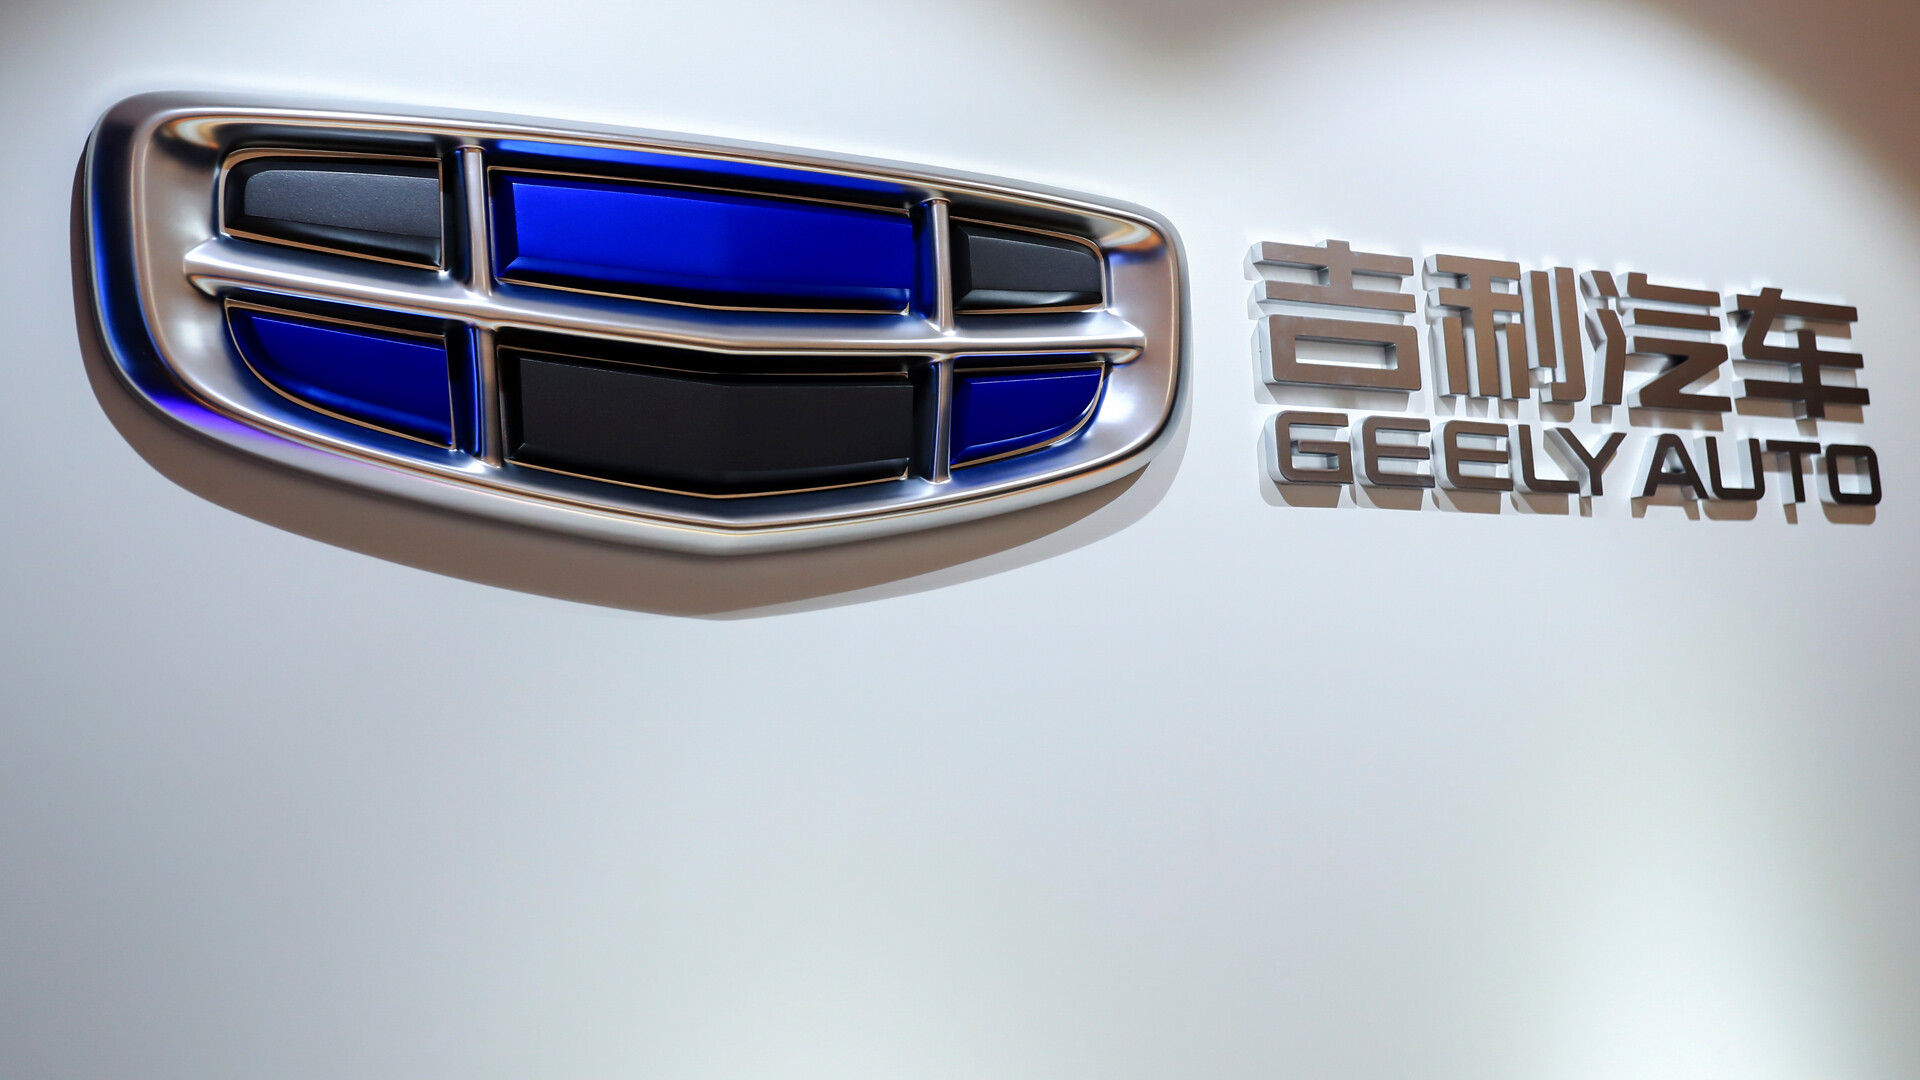 Geely: Chinese automotive brand, began car production in 2002. 1920x1080 Full HD Background.